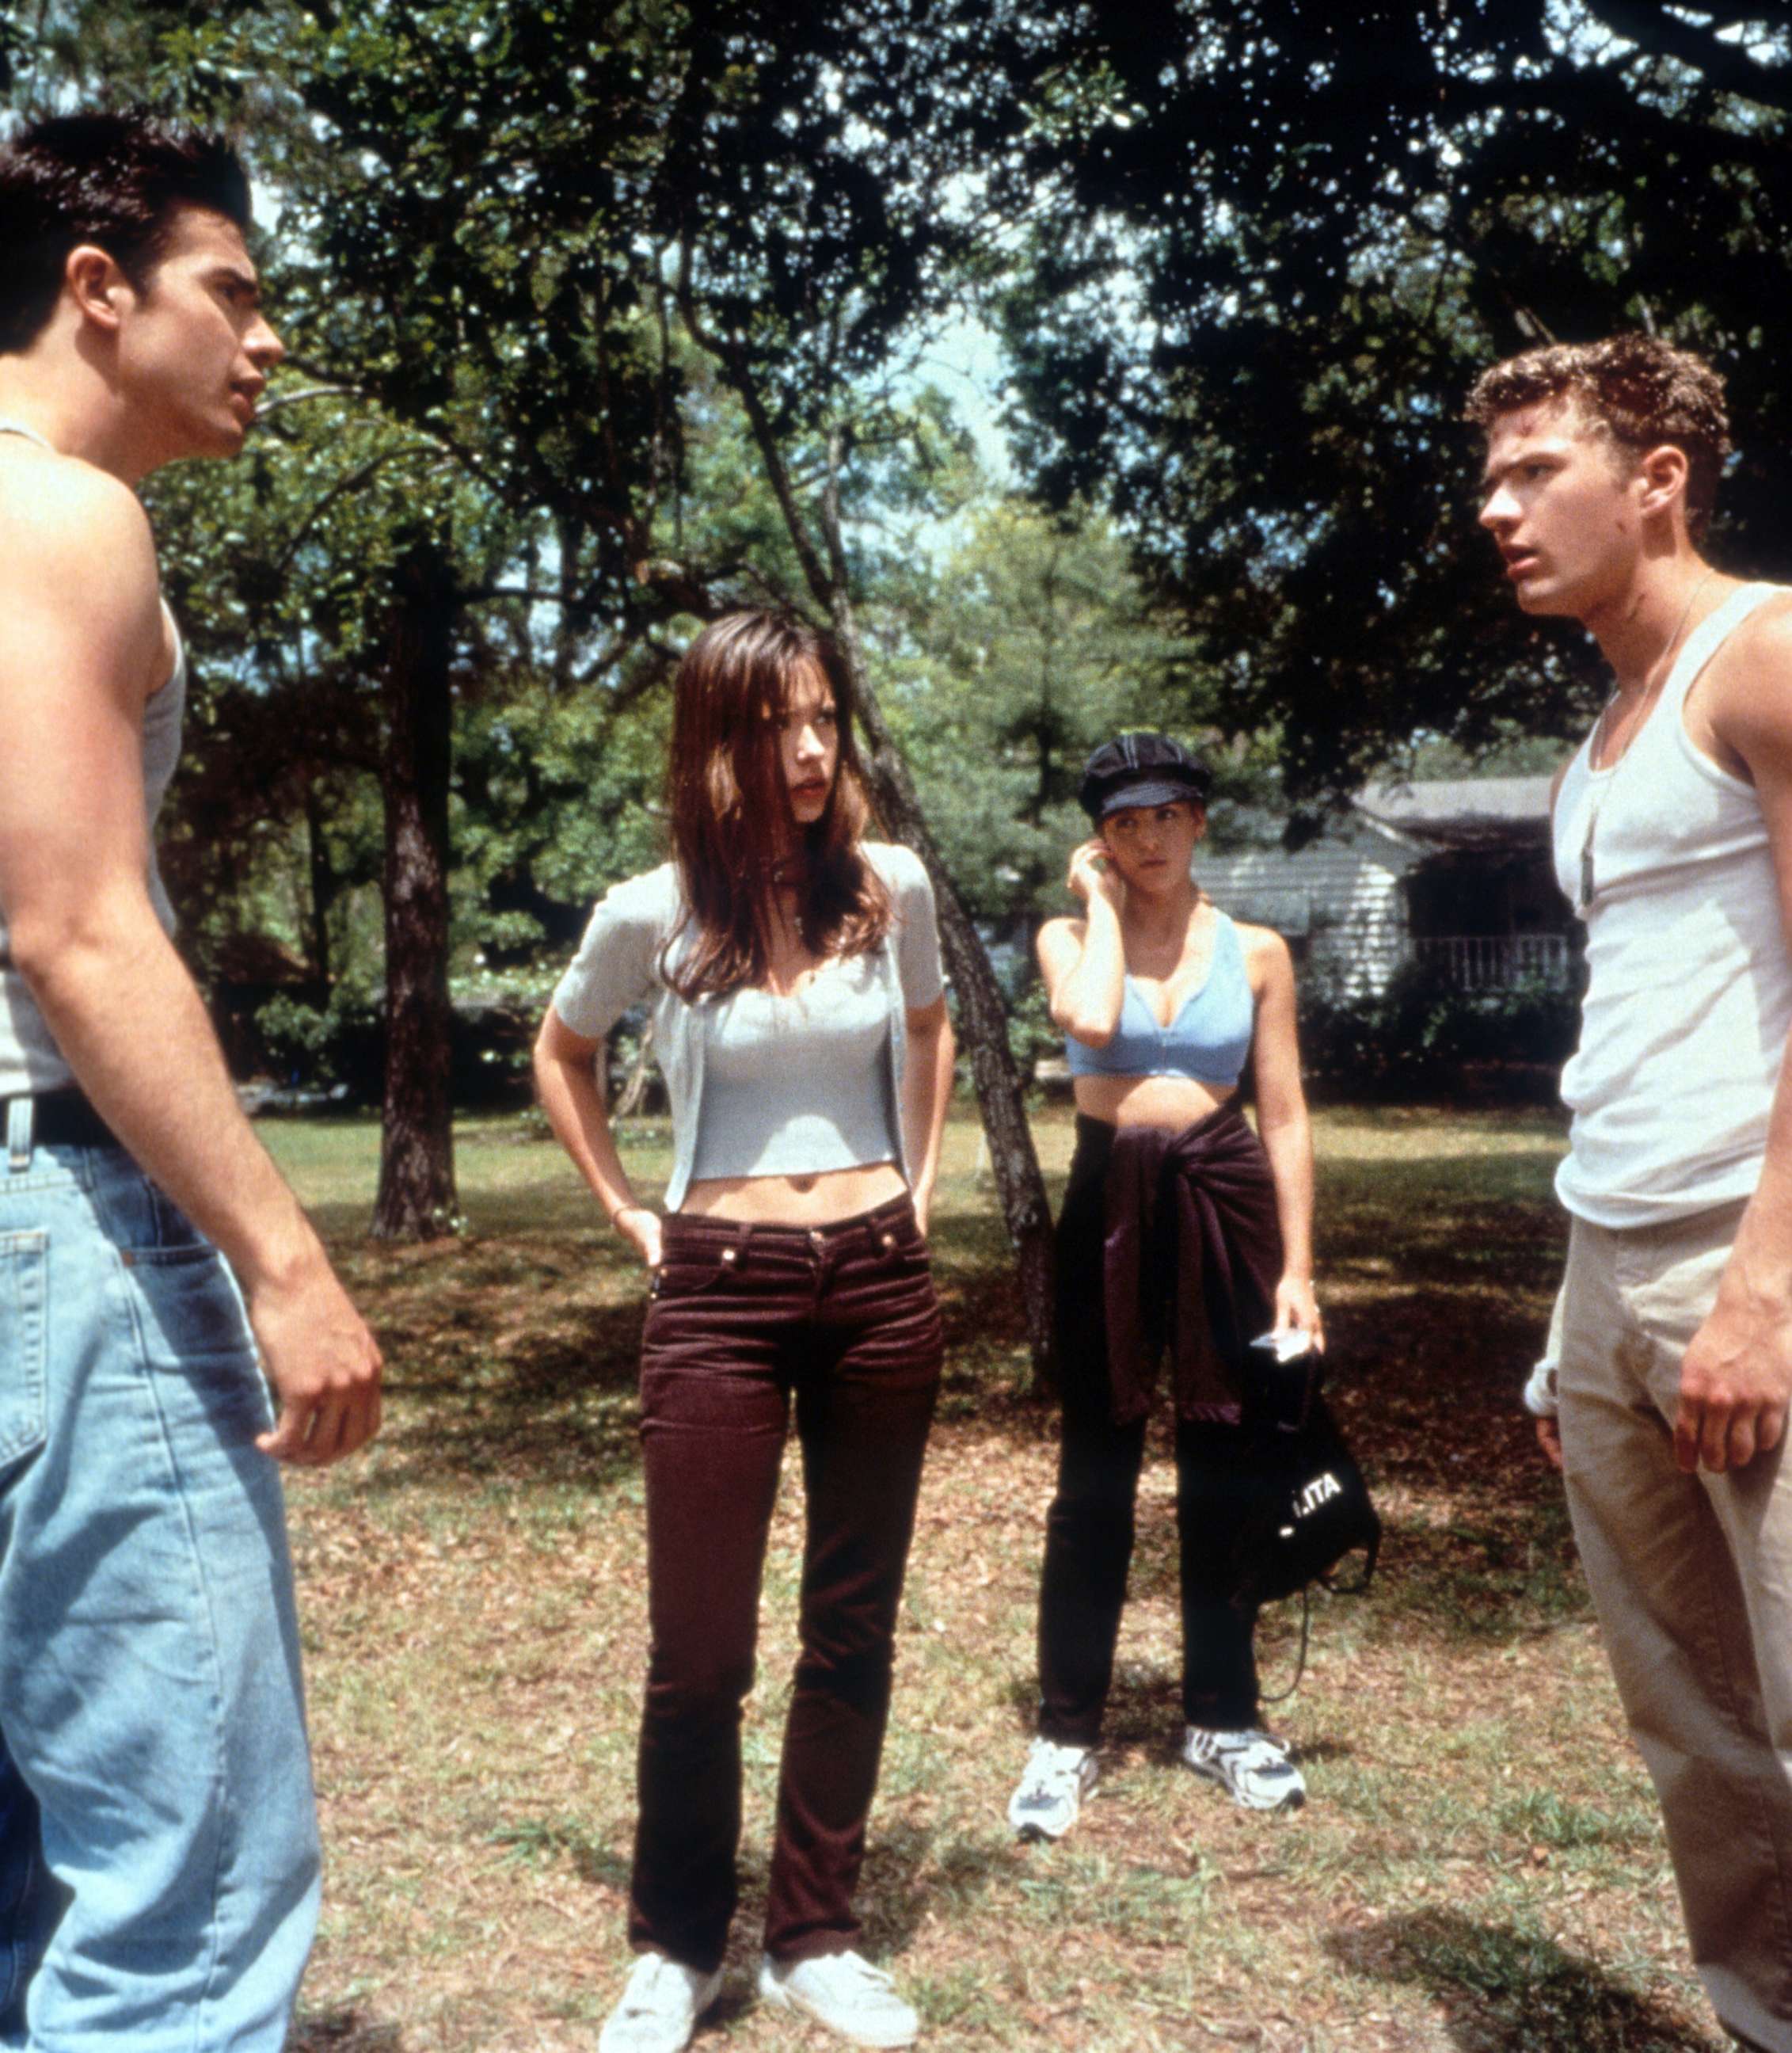 PHOTO: Freddie Prinze Jr. has a confrontation with a man as Jennifer Love Hewitt watches in a scene from the film "I Still Know What You Did Last Summer", 1998.